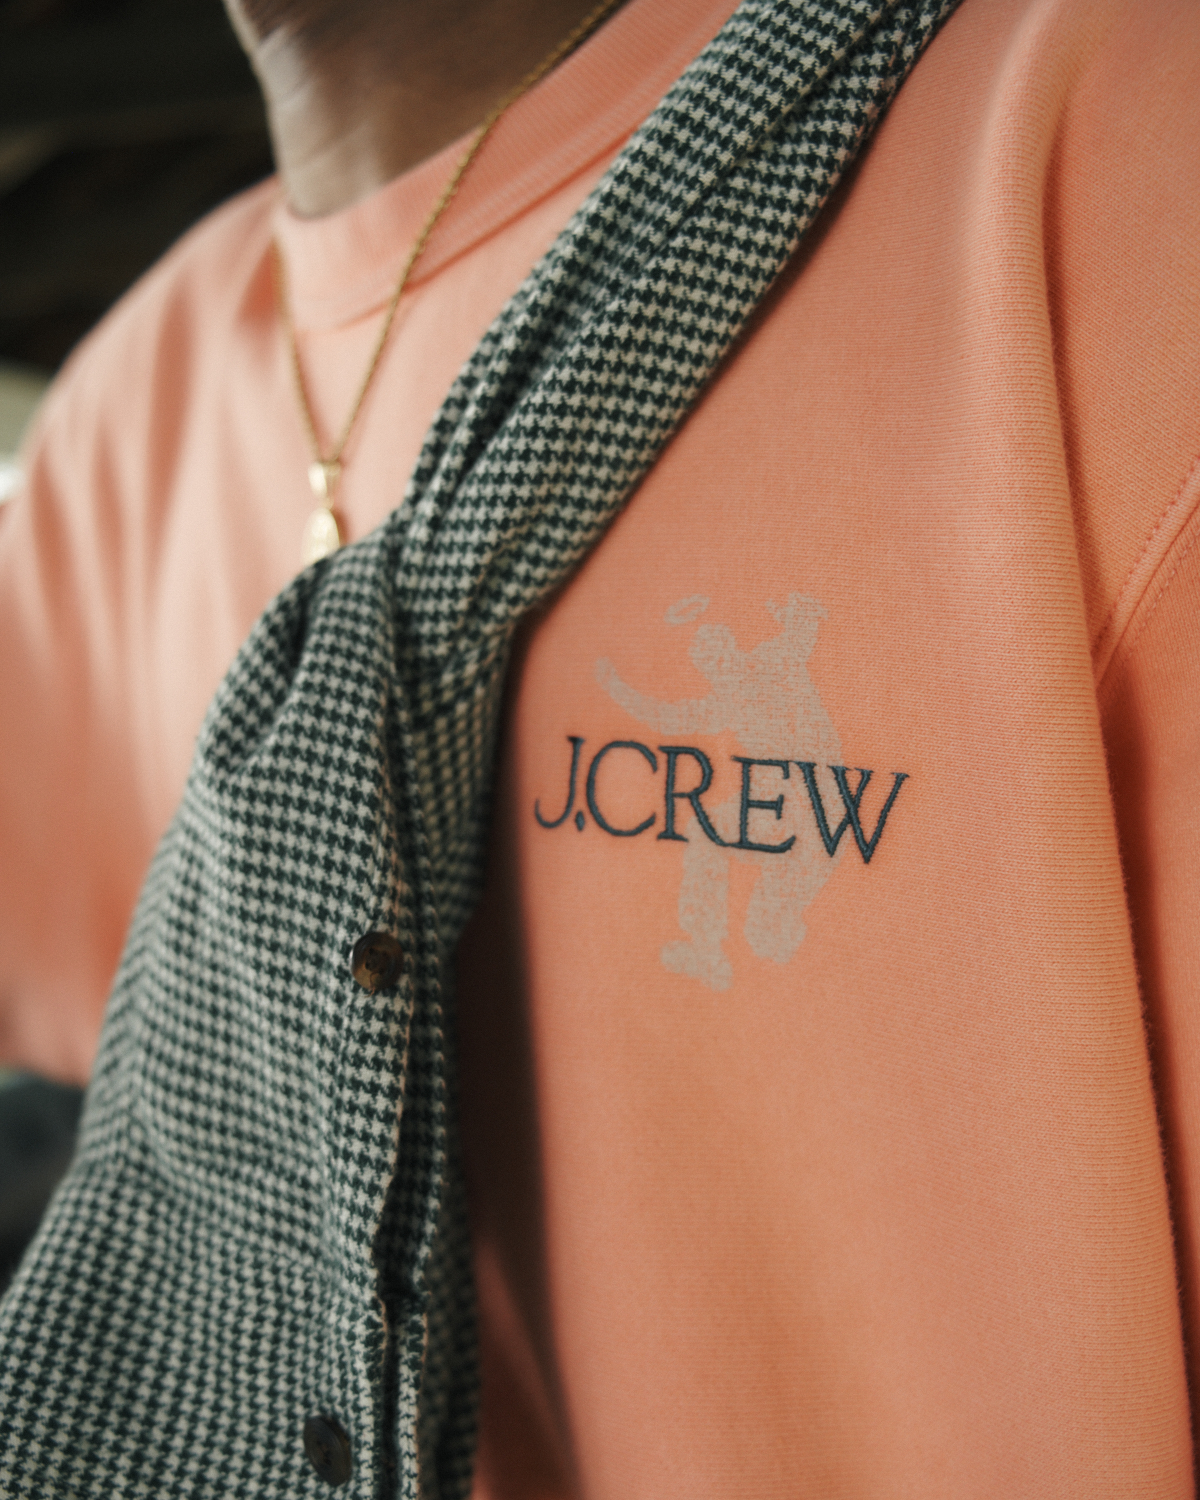 Imagery from Union LA & J.Crew's collaborative clothing collection that releases in September 2023